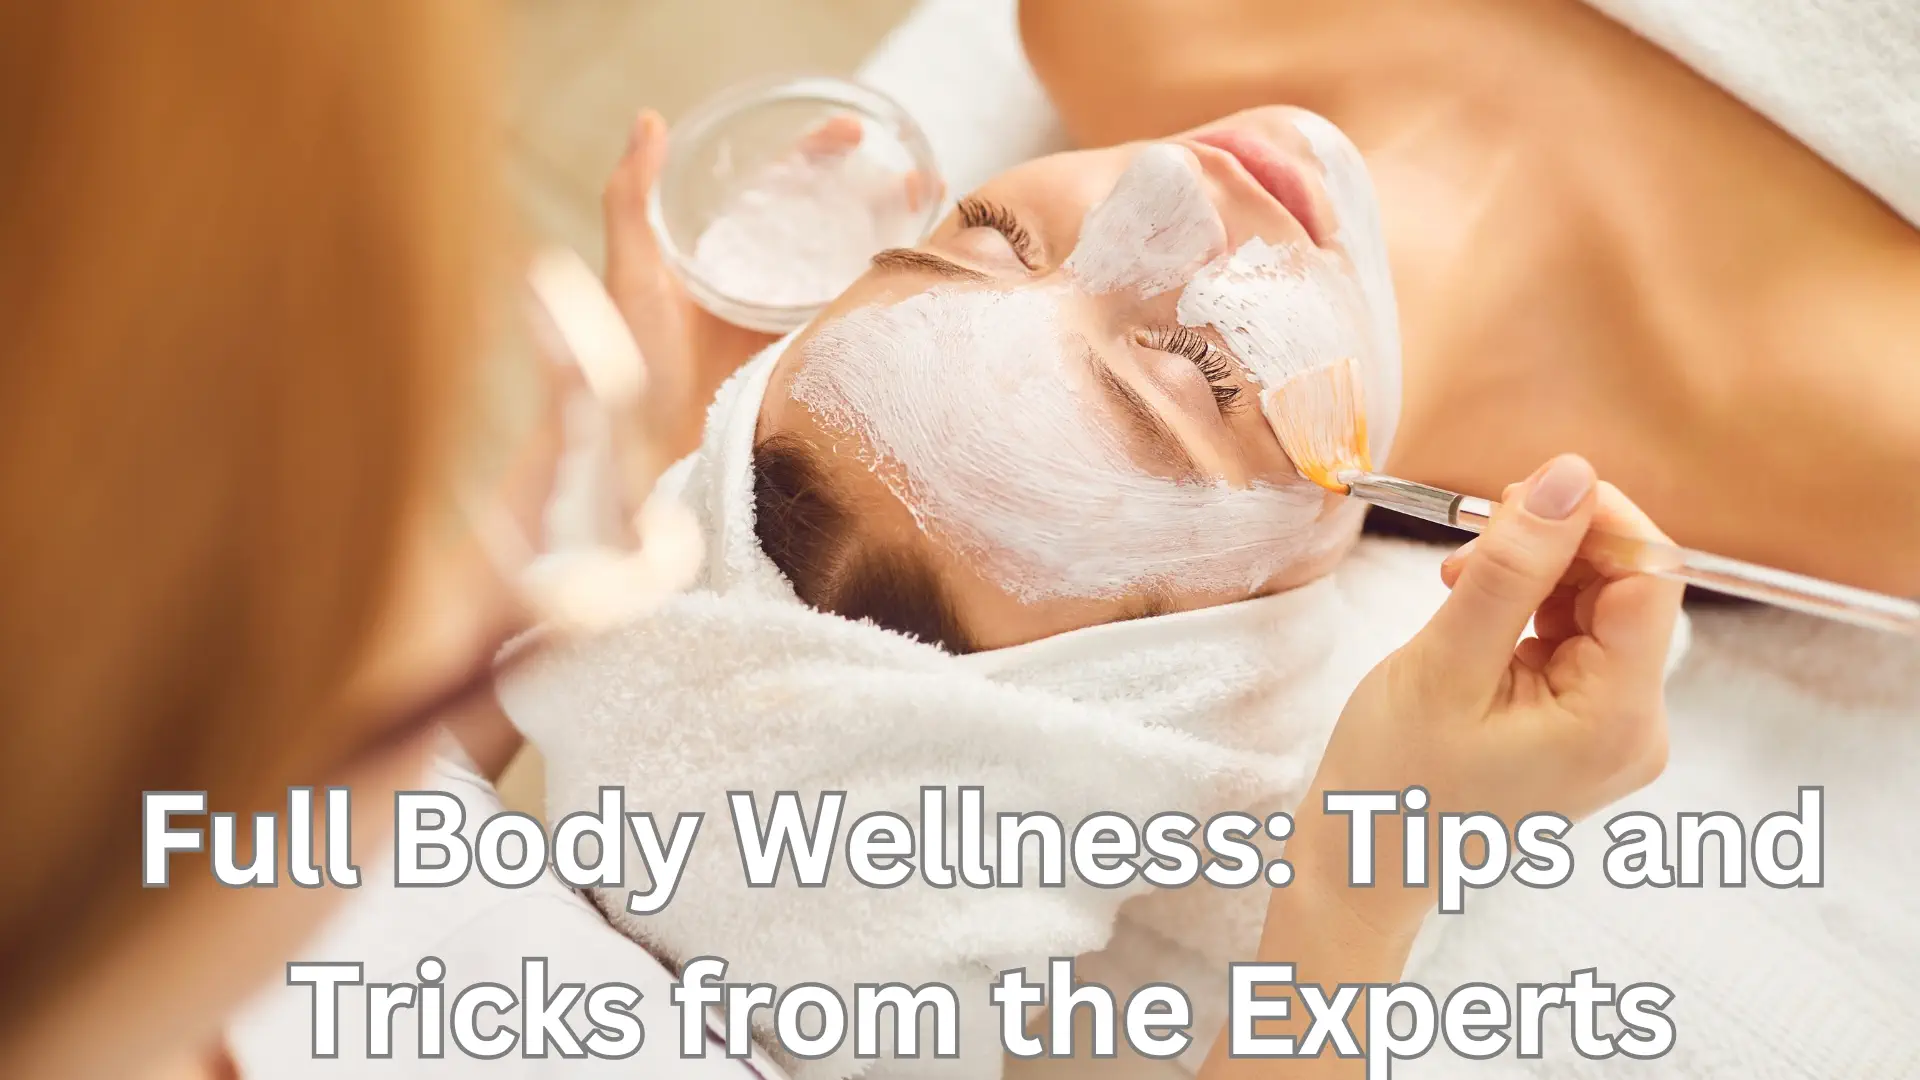 Full Body Wellness: Tips and Tricks from the Experts